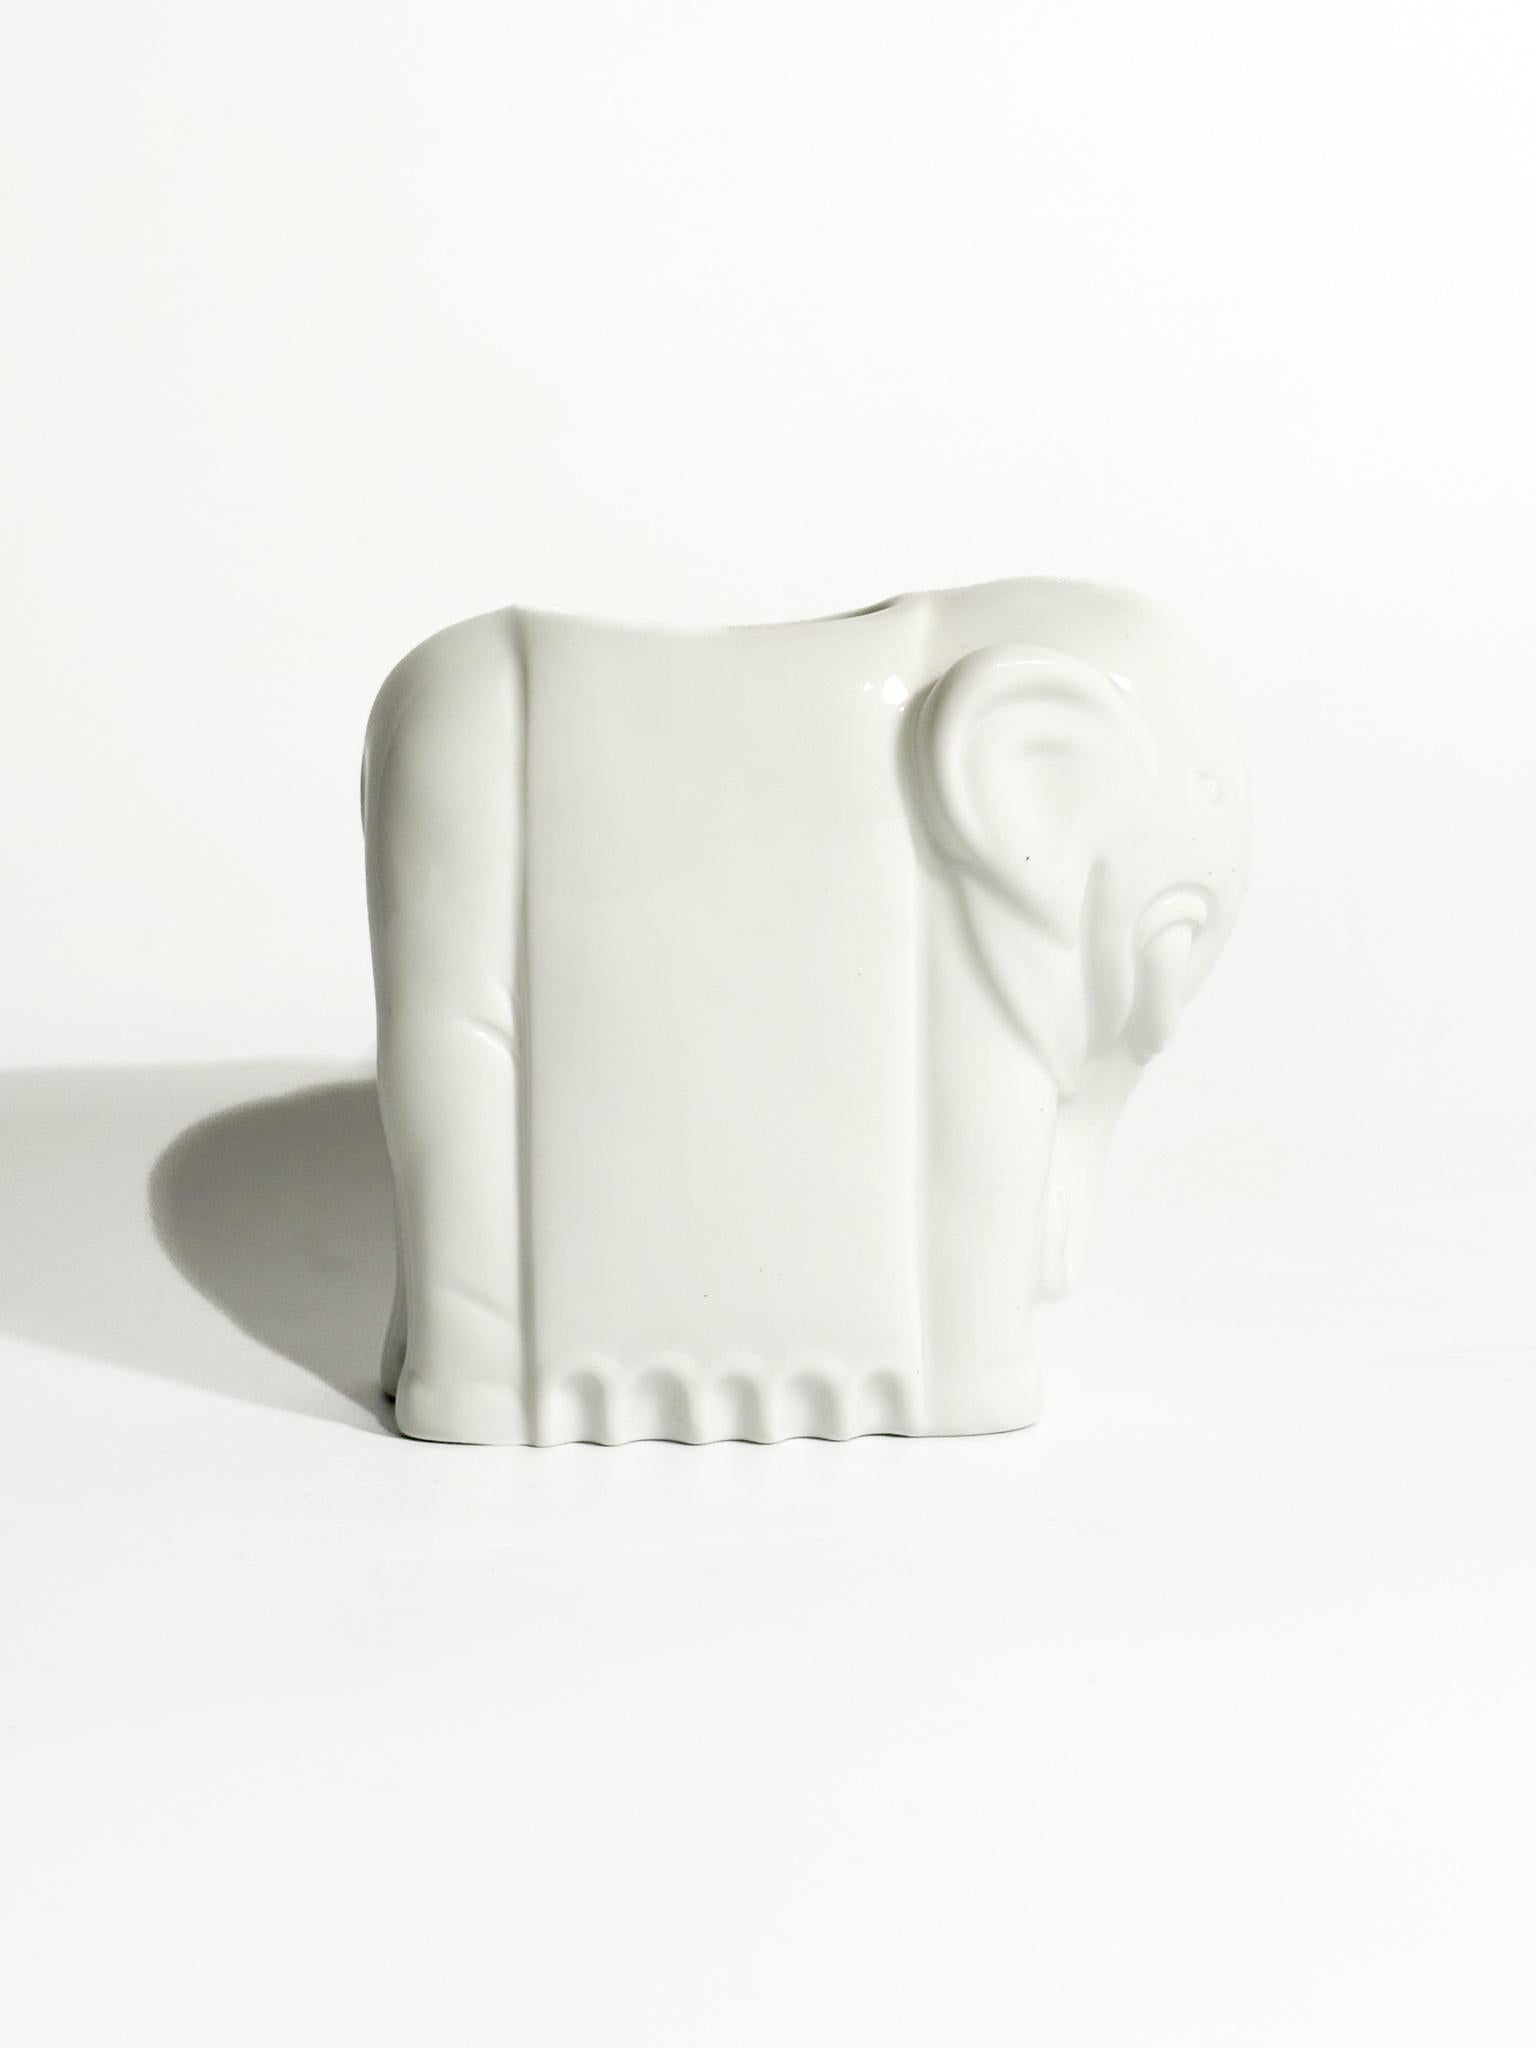 Elephant vase in white ceramic, re-edition of the model designed by Gio Ponti for Richard Ginori, made in the 1980s

Ø cm 10 Ø cm 5,5 h cm 10

Company of Lombard origin founded in 1896 when the Marquis Carlo Ginori, passionate about white gold,